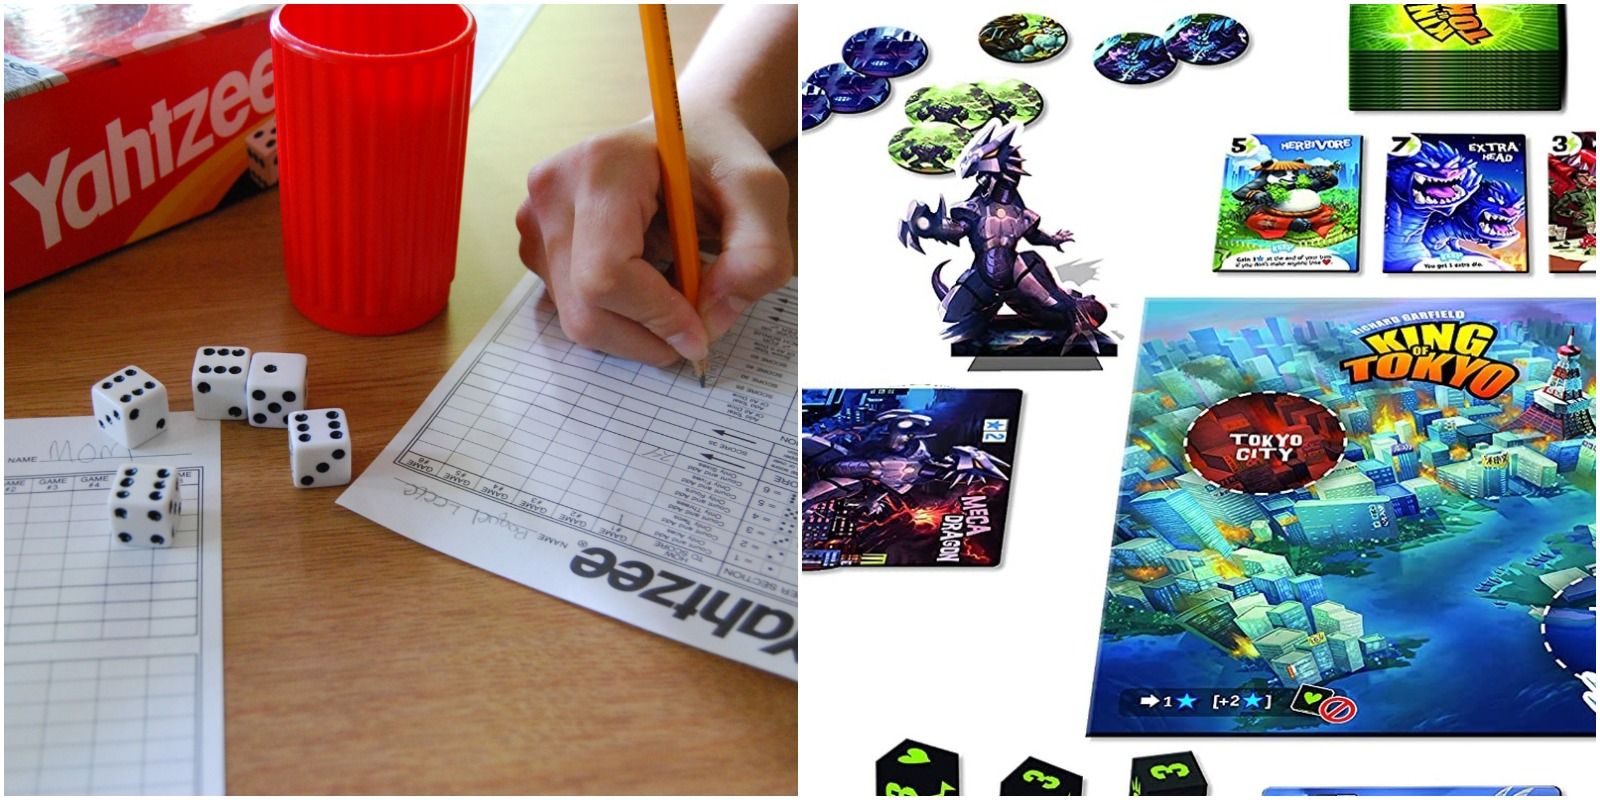 Yahtzee And King Of Tokyo Board Game Being Played